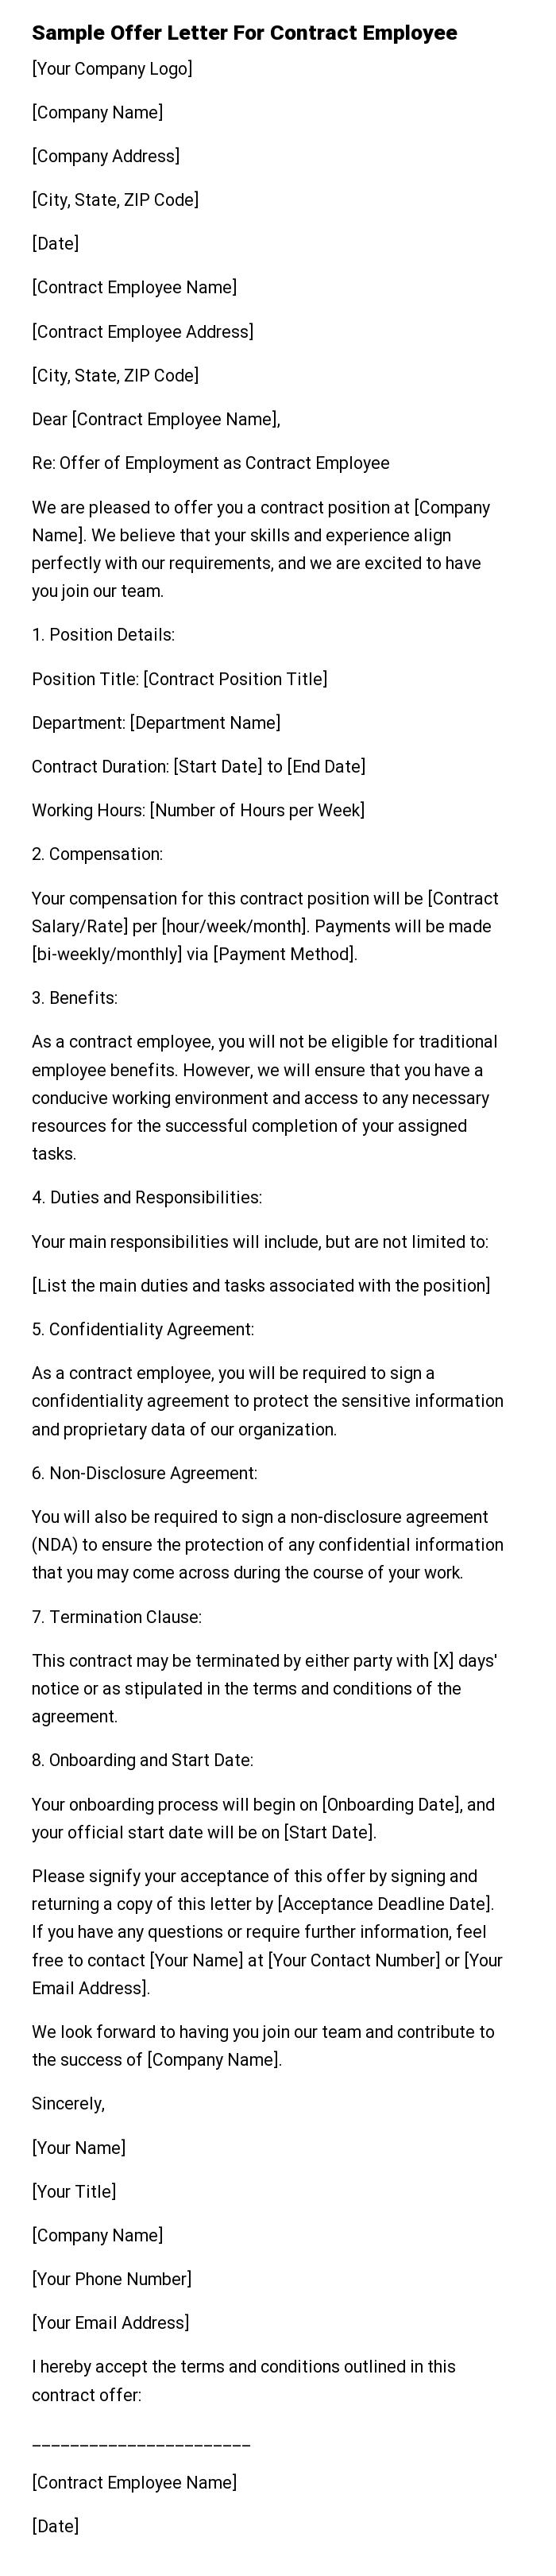 Sample Offer Letter For Contract Employee